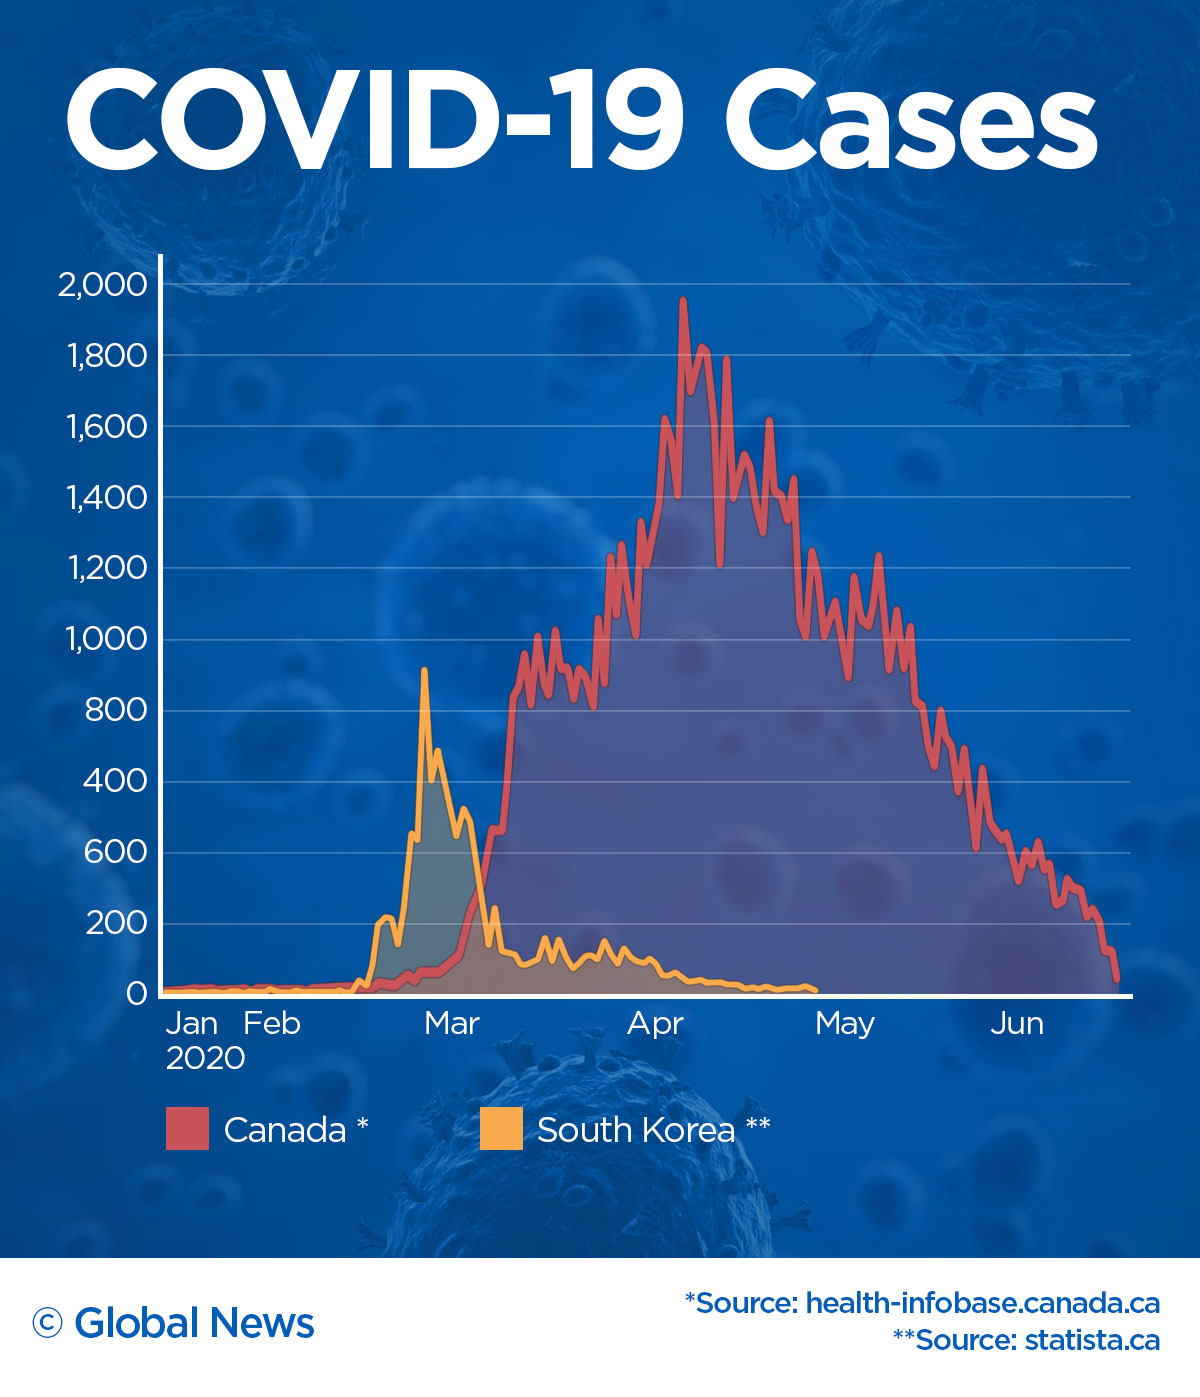 Does the coronavirus pandemic really come in waves? Experts raise